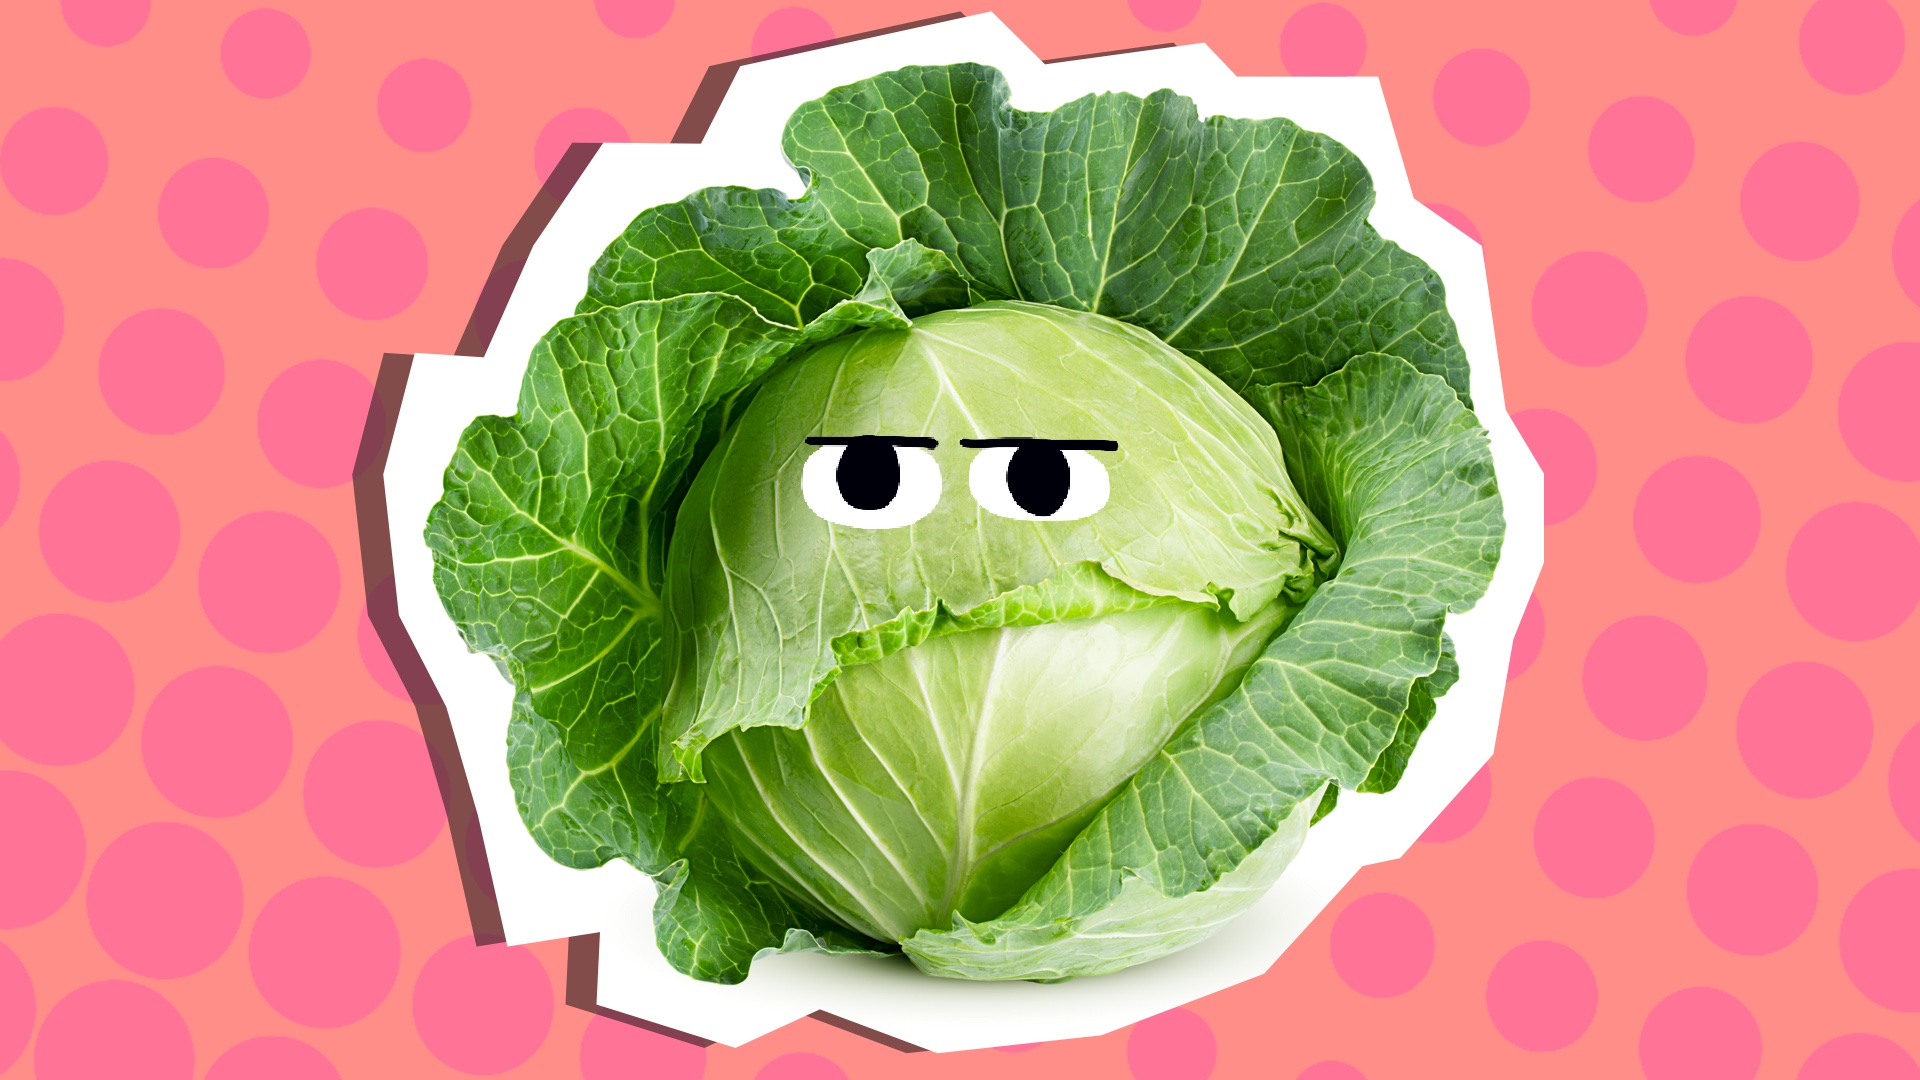 A cabbage against a pink spotty background 